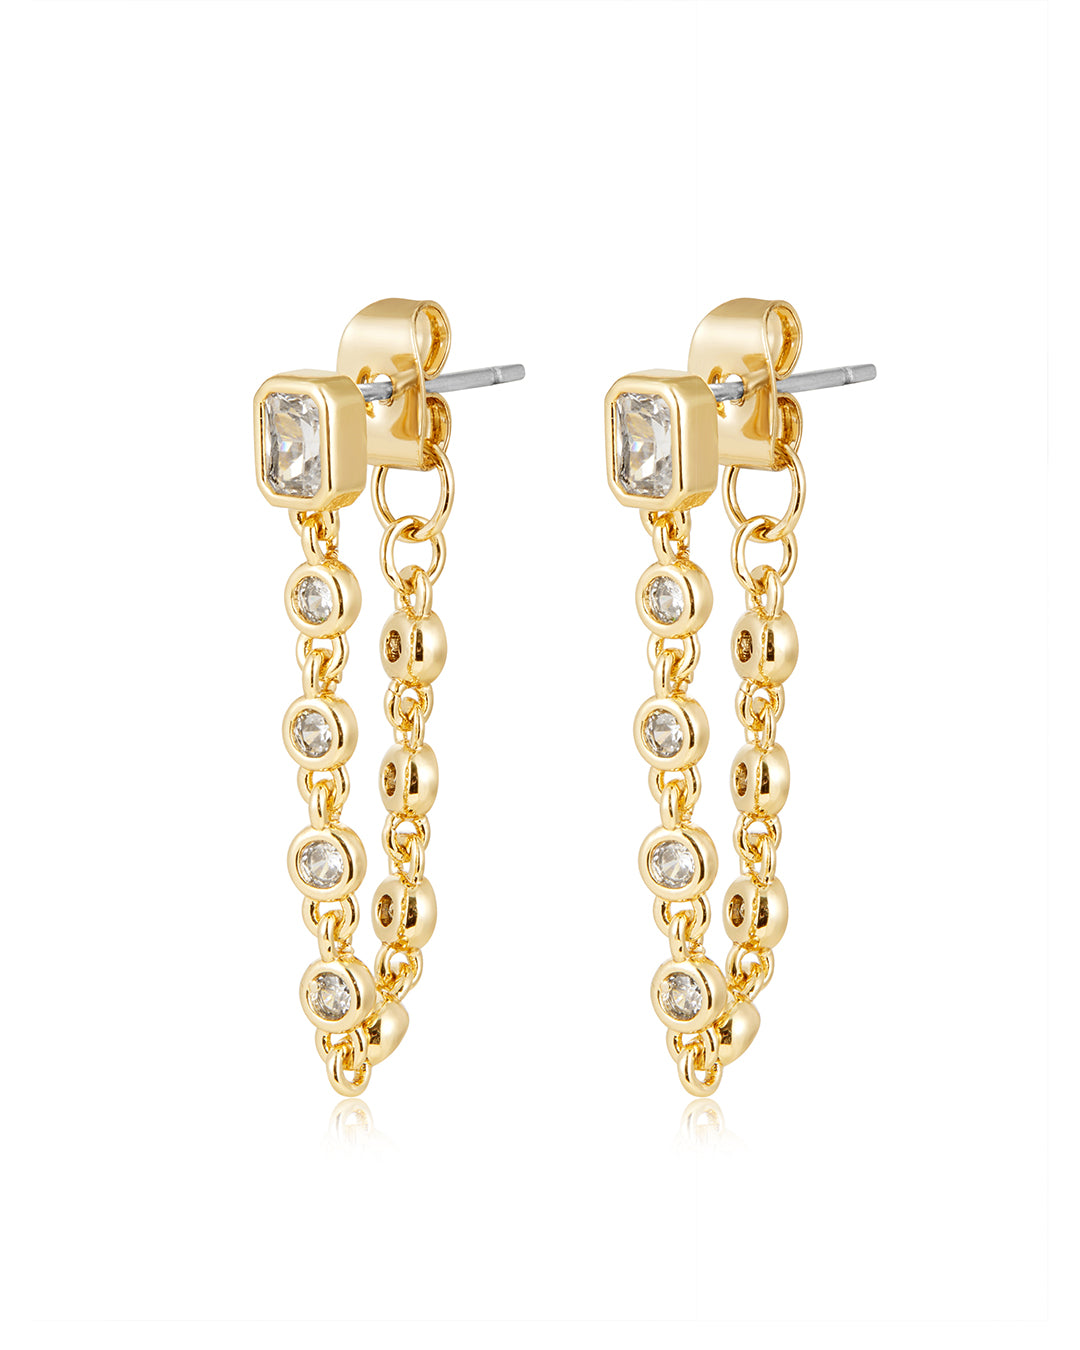 Connecting Chain Stud Earring Backs